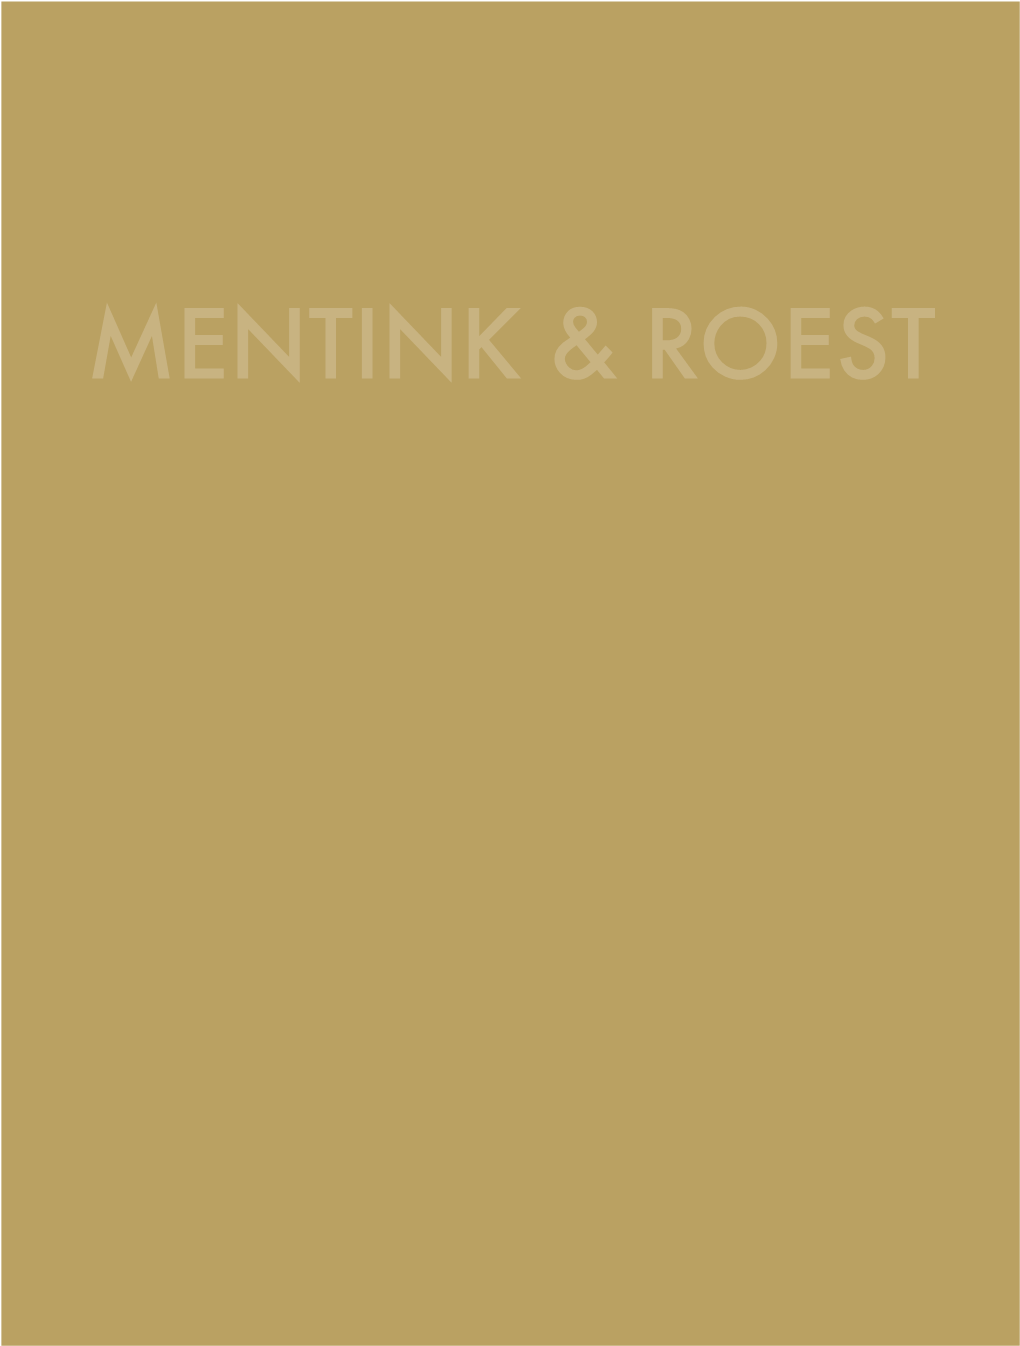 Magnificent Clocks from the Mentink & Roest Collection Magnificent Clocks from the Mentink & Roest Collection